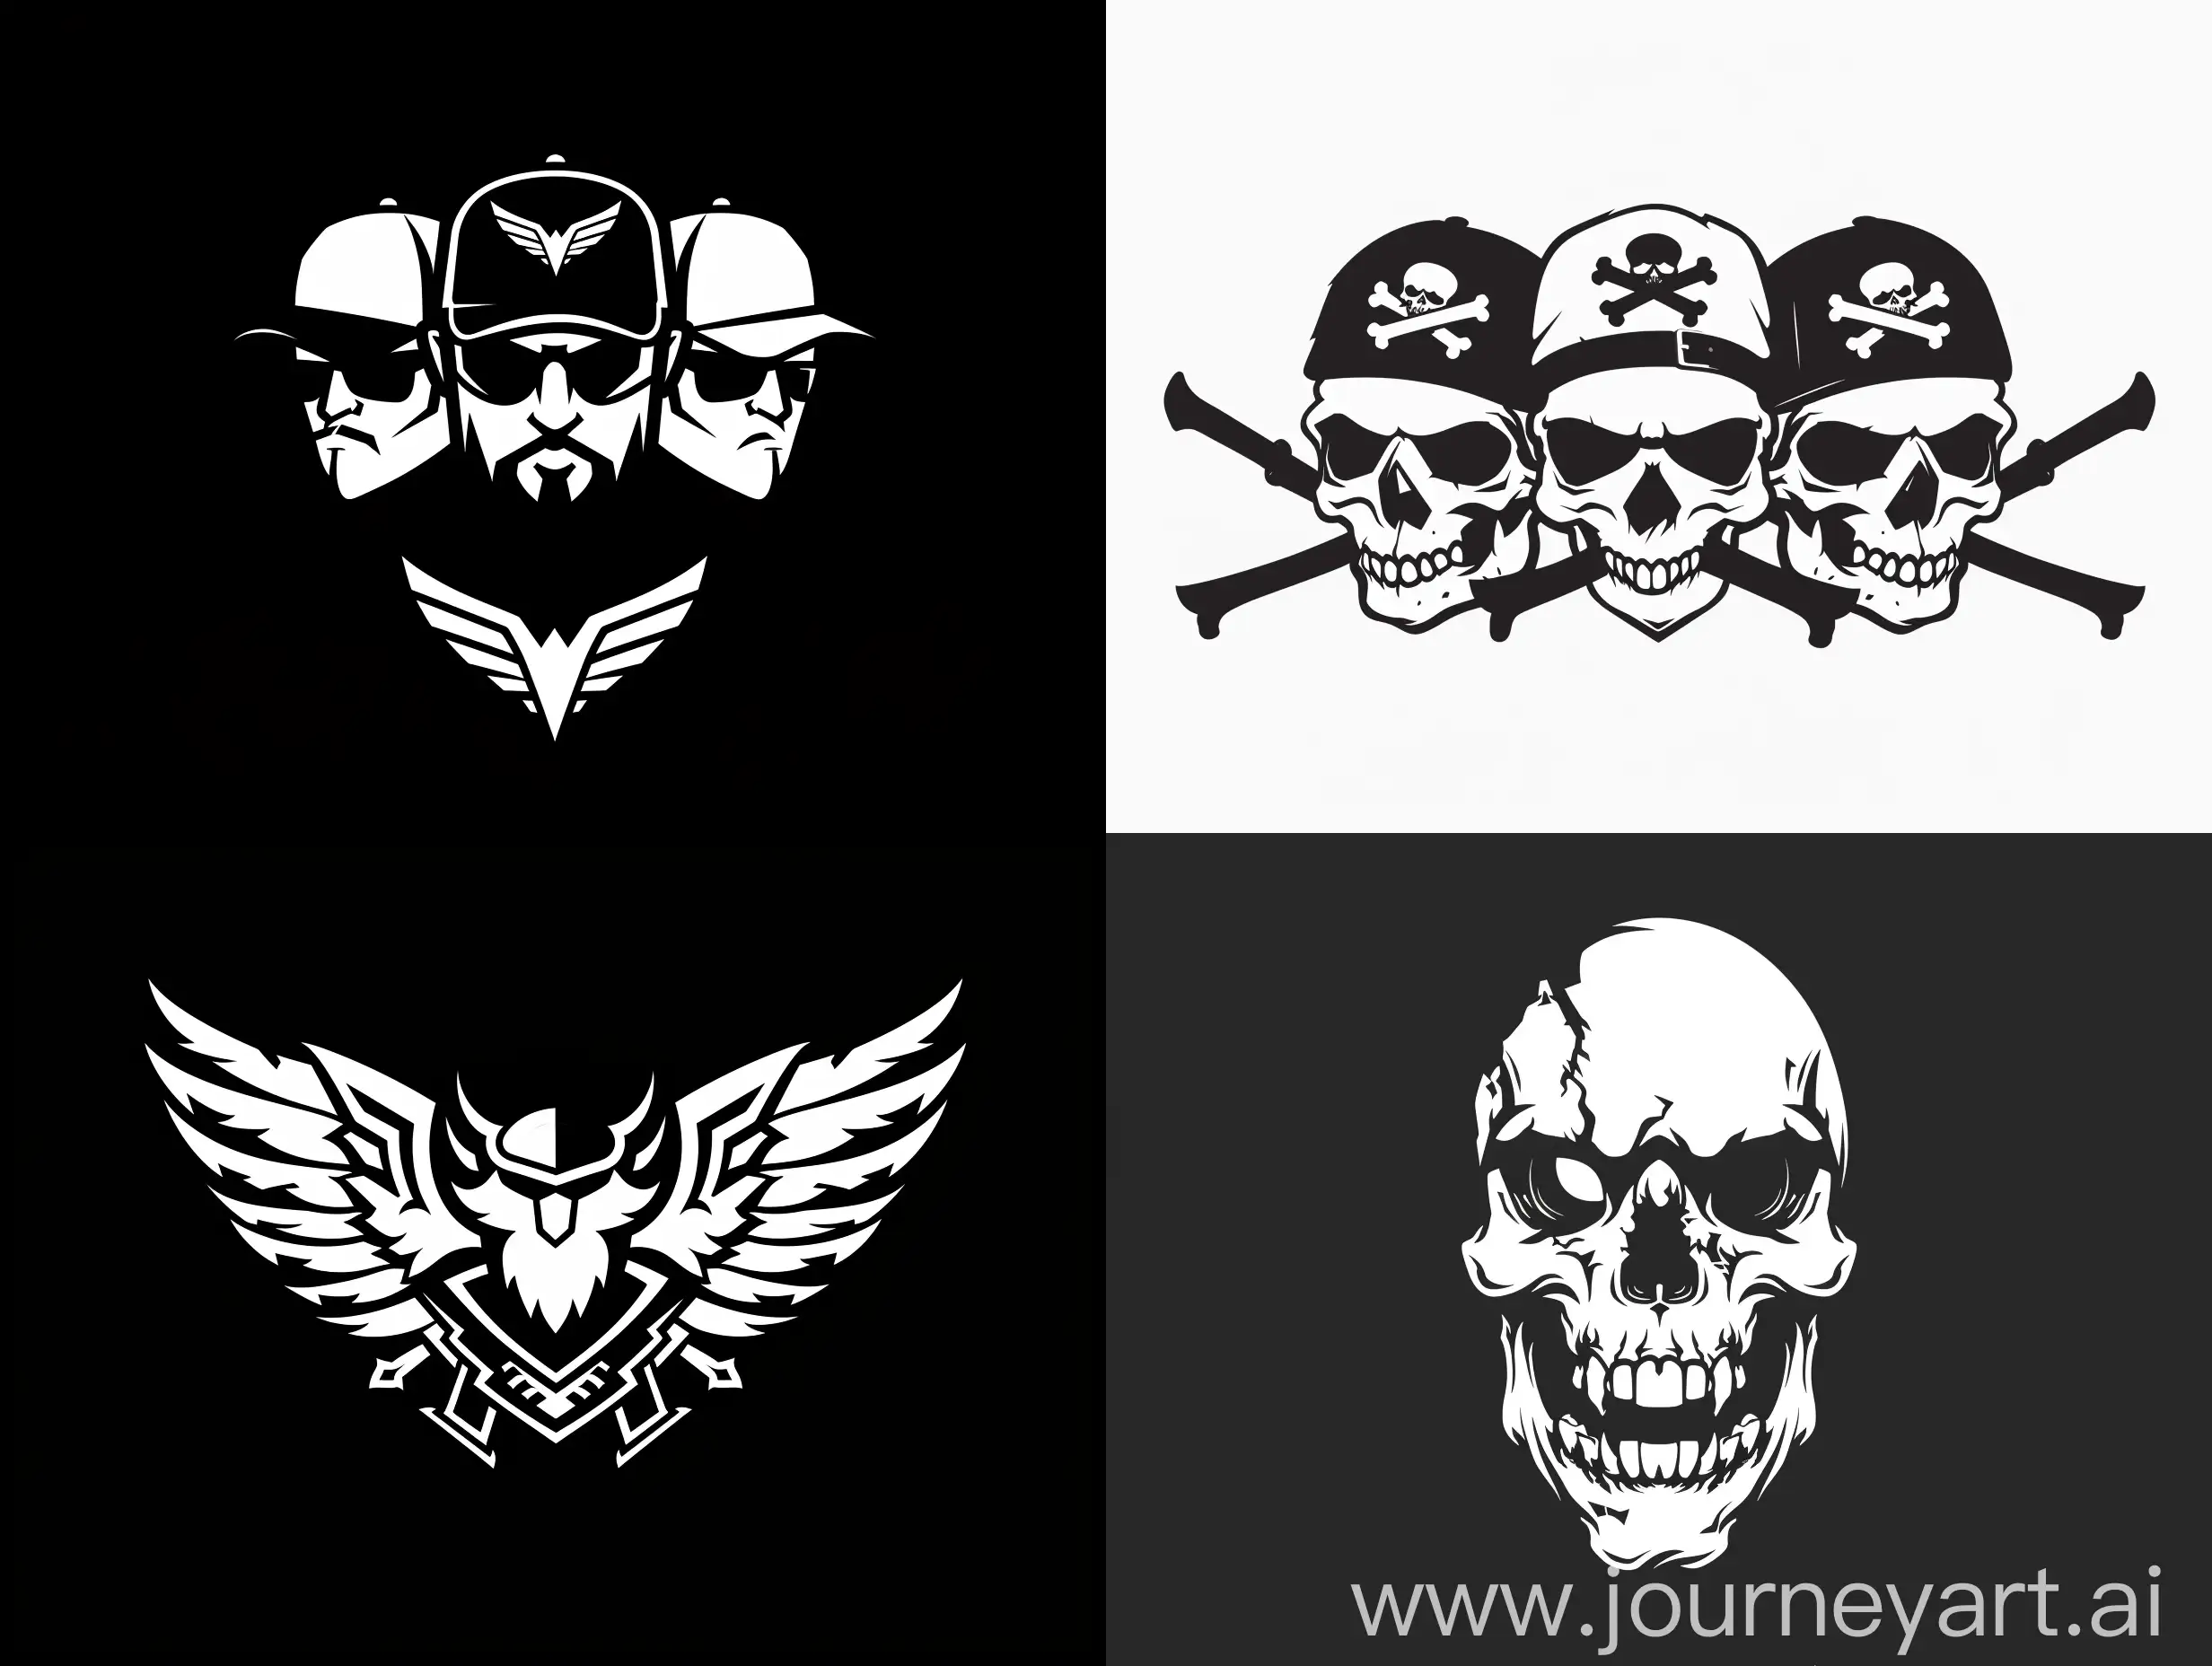 Gang-Logo-in-Black-and-White-Unity-and-Power-Symbolized